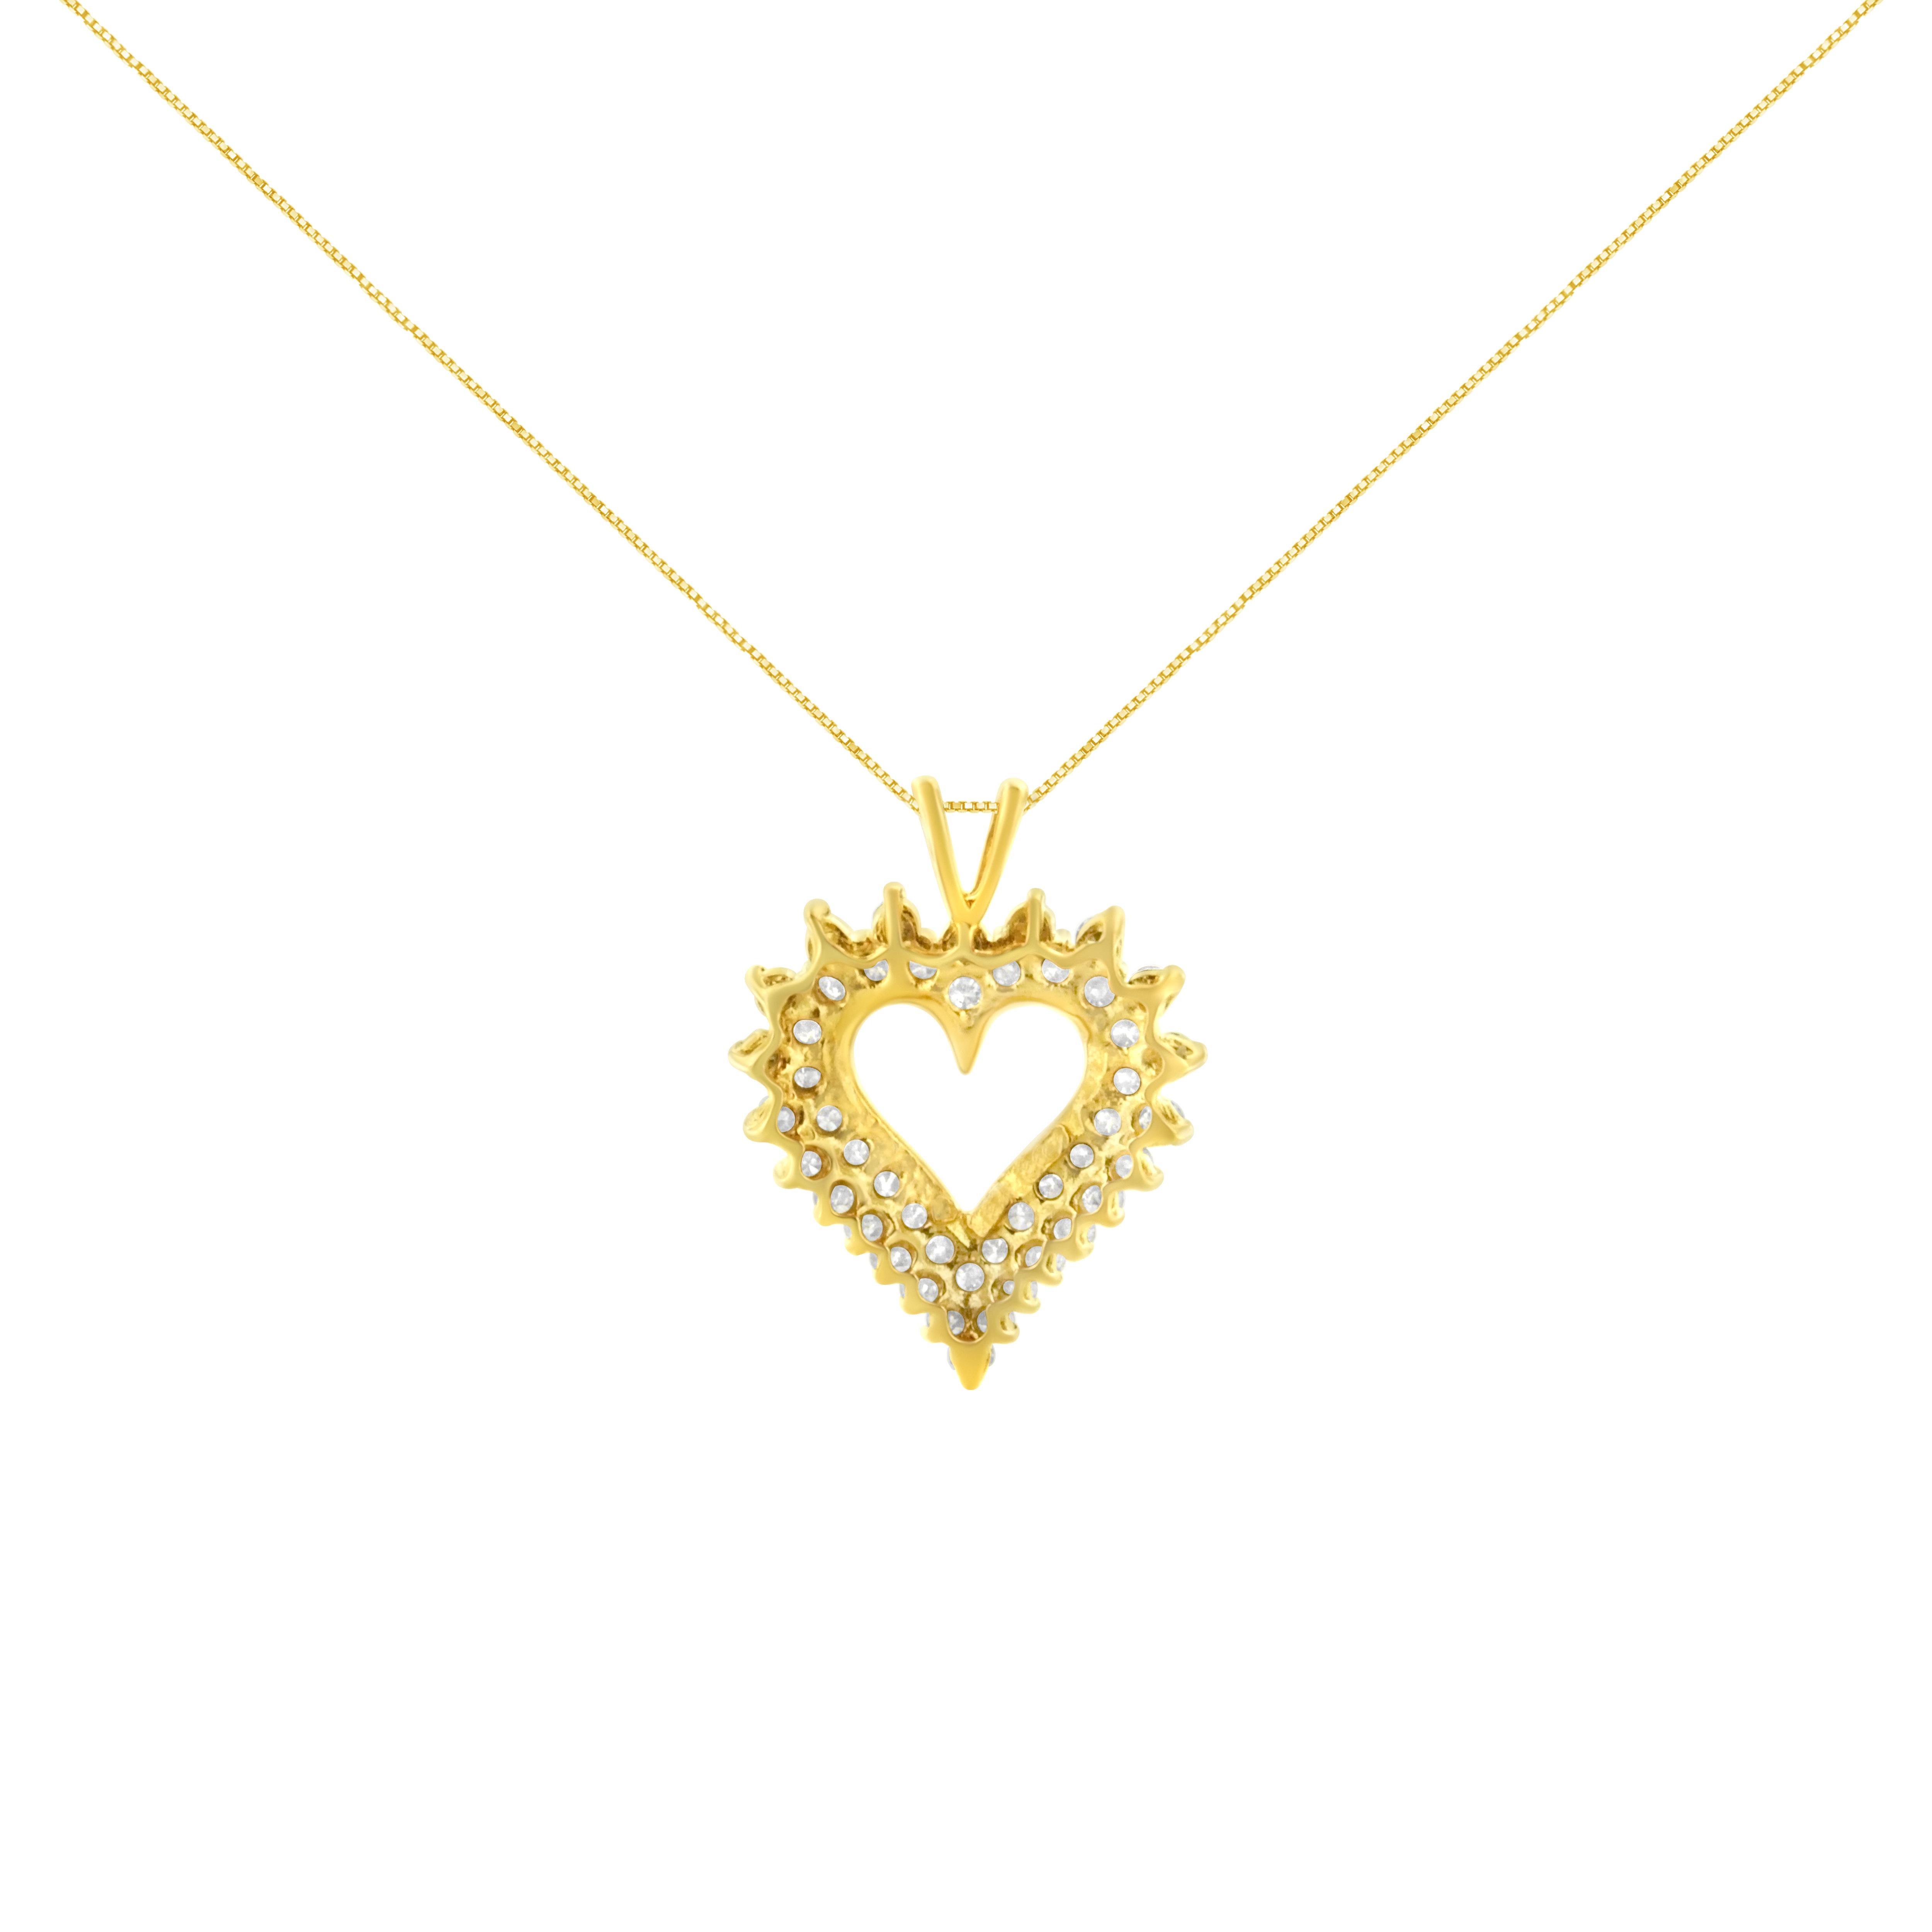 Chic and trendy, this 14k yellow gold pendant has a beautiful gold heart motif hanging from a 18